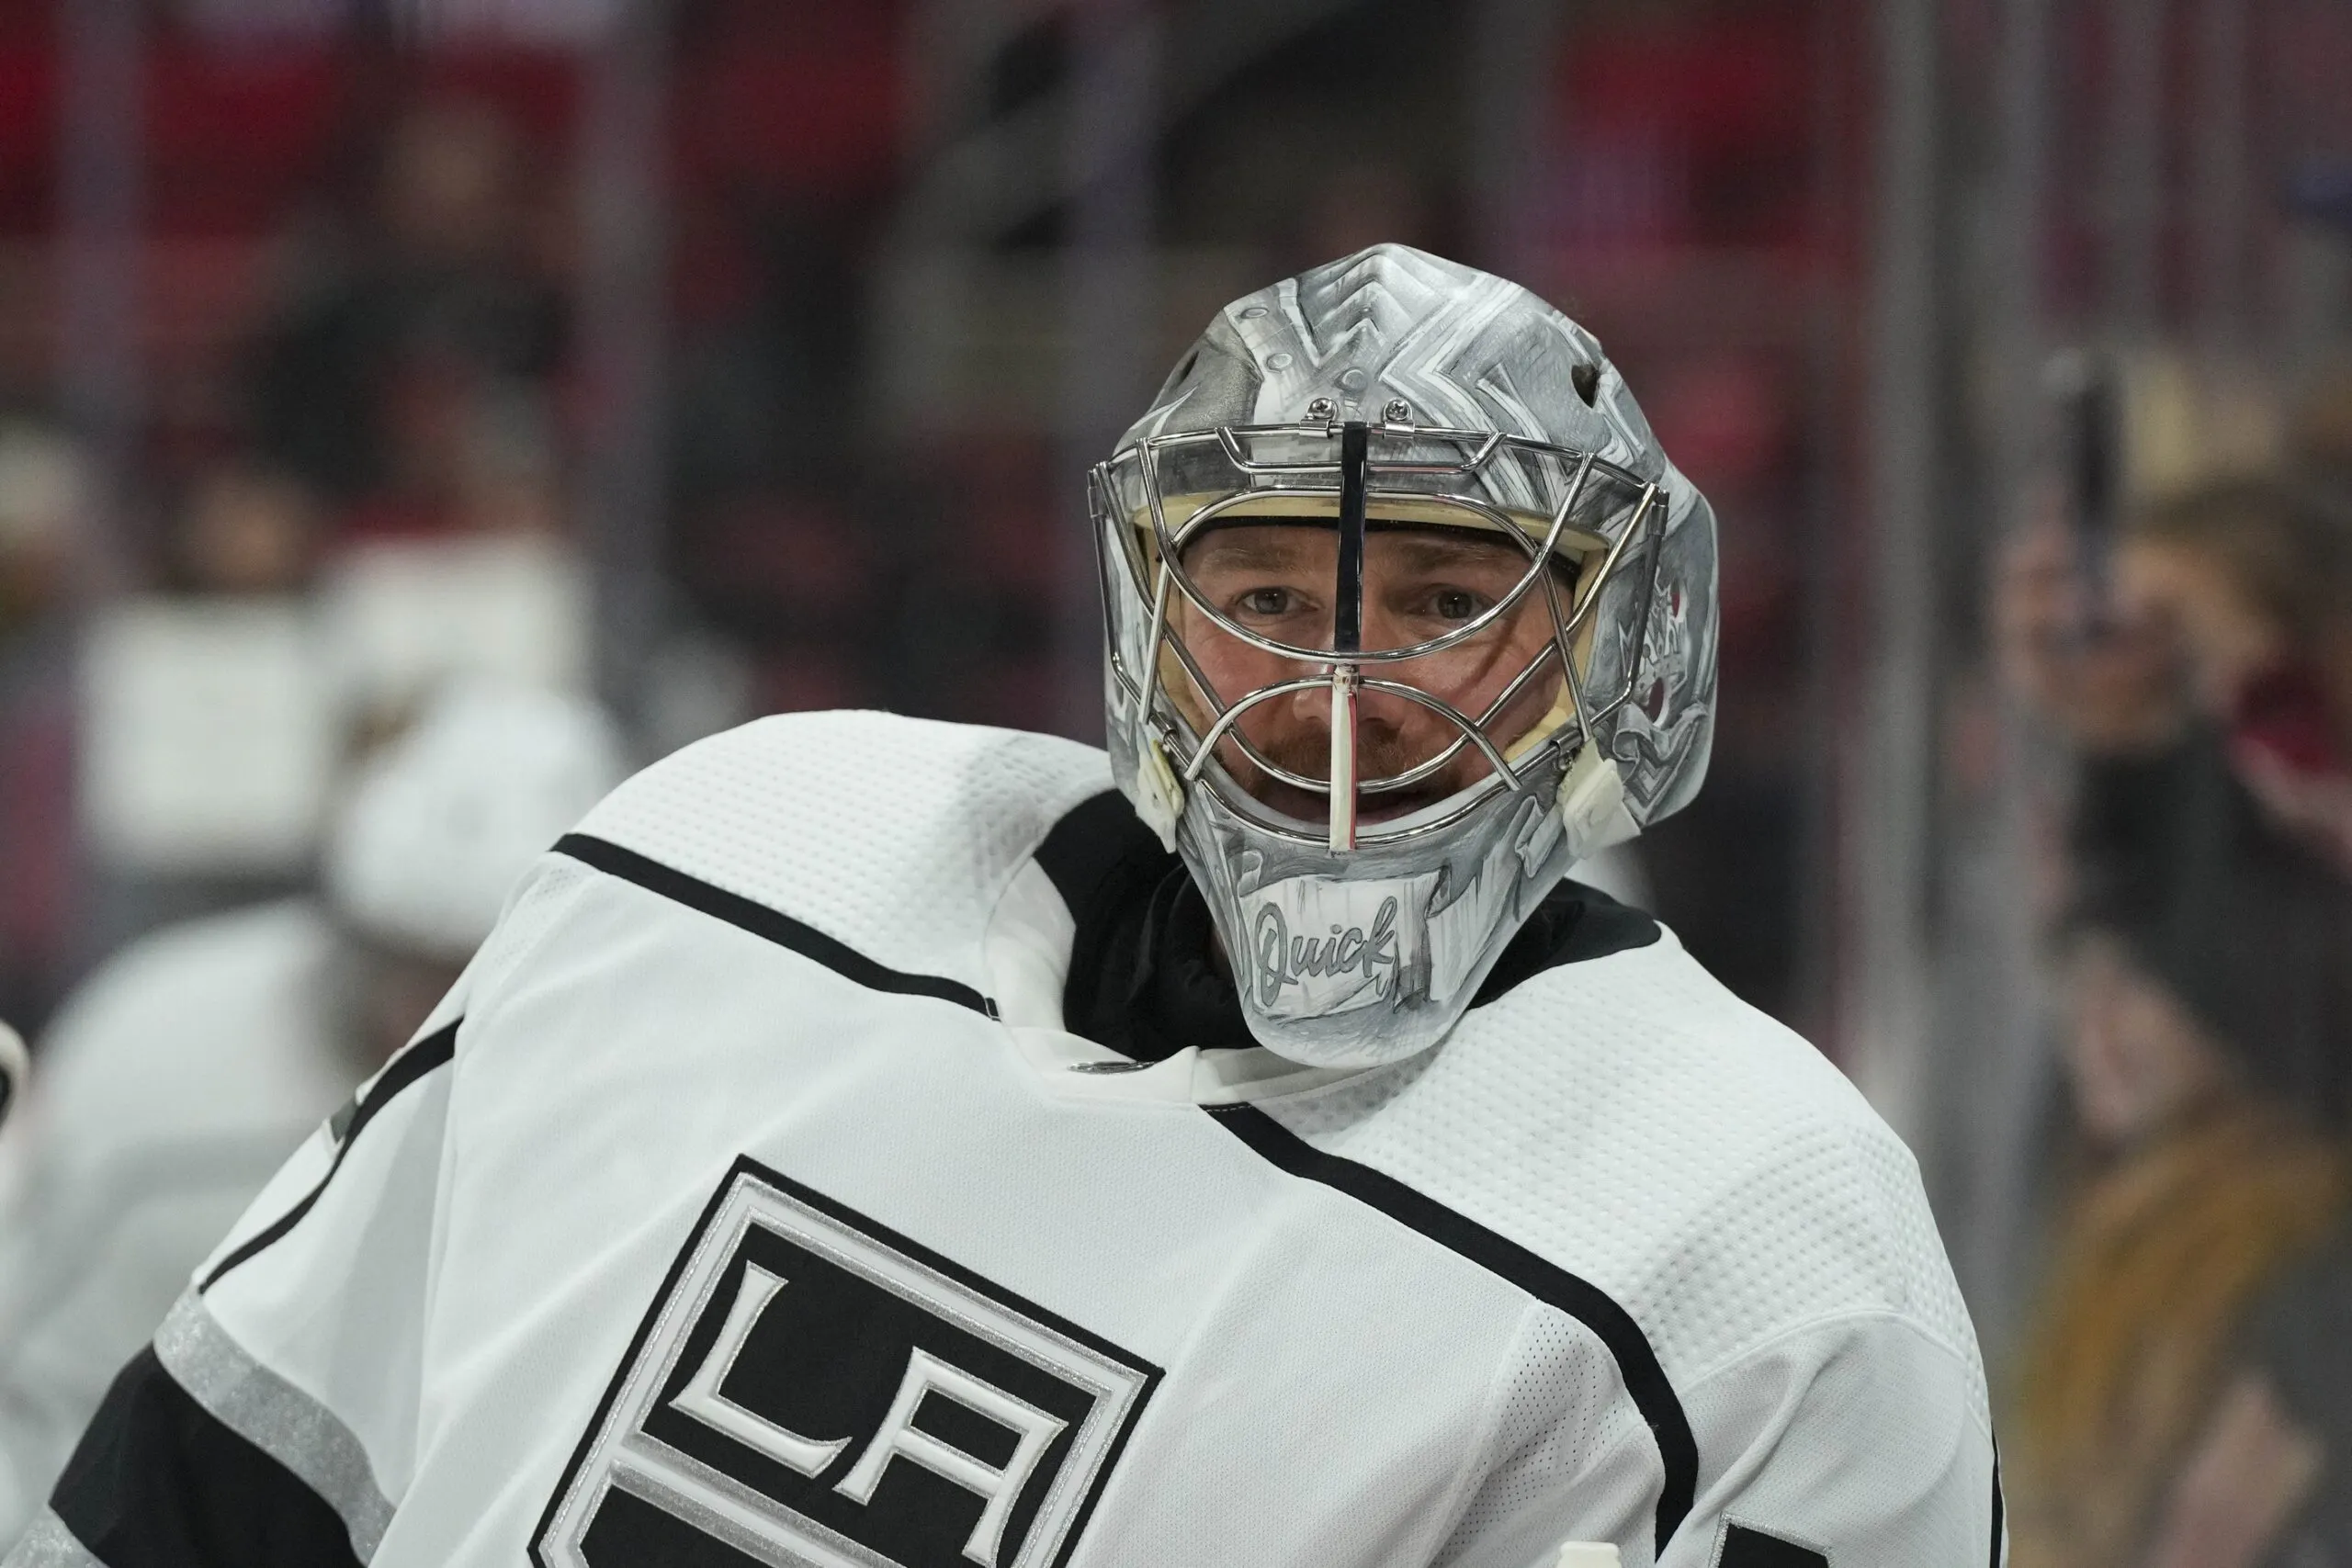 Sources: Kings trade icon Jonathan Quick in jaw-dropper for Gavrikov, Korpisalo